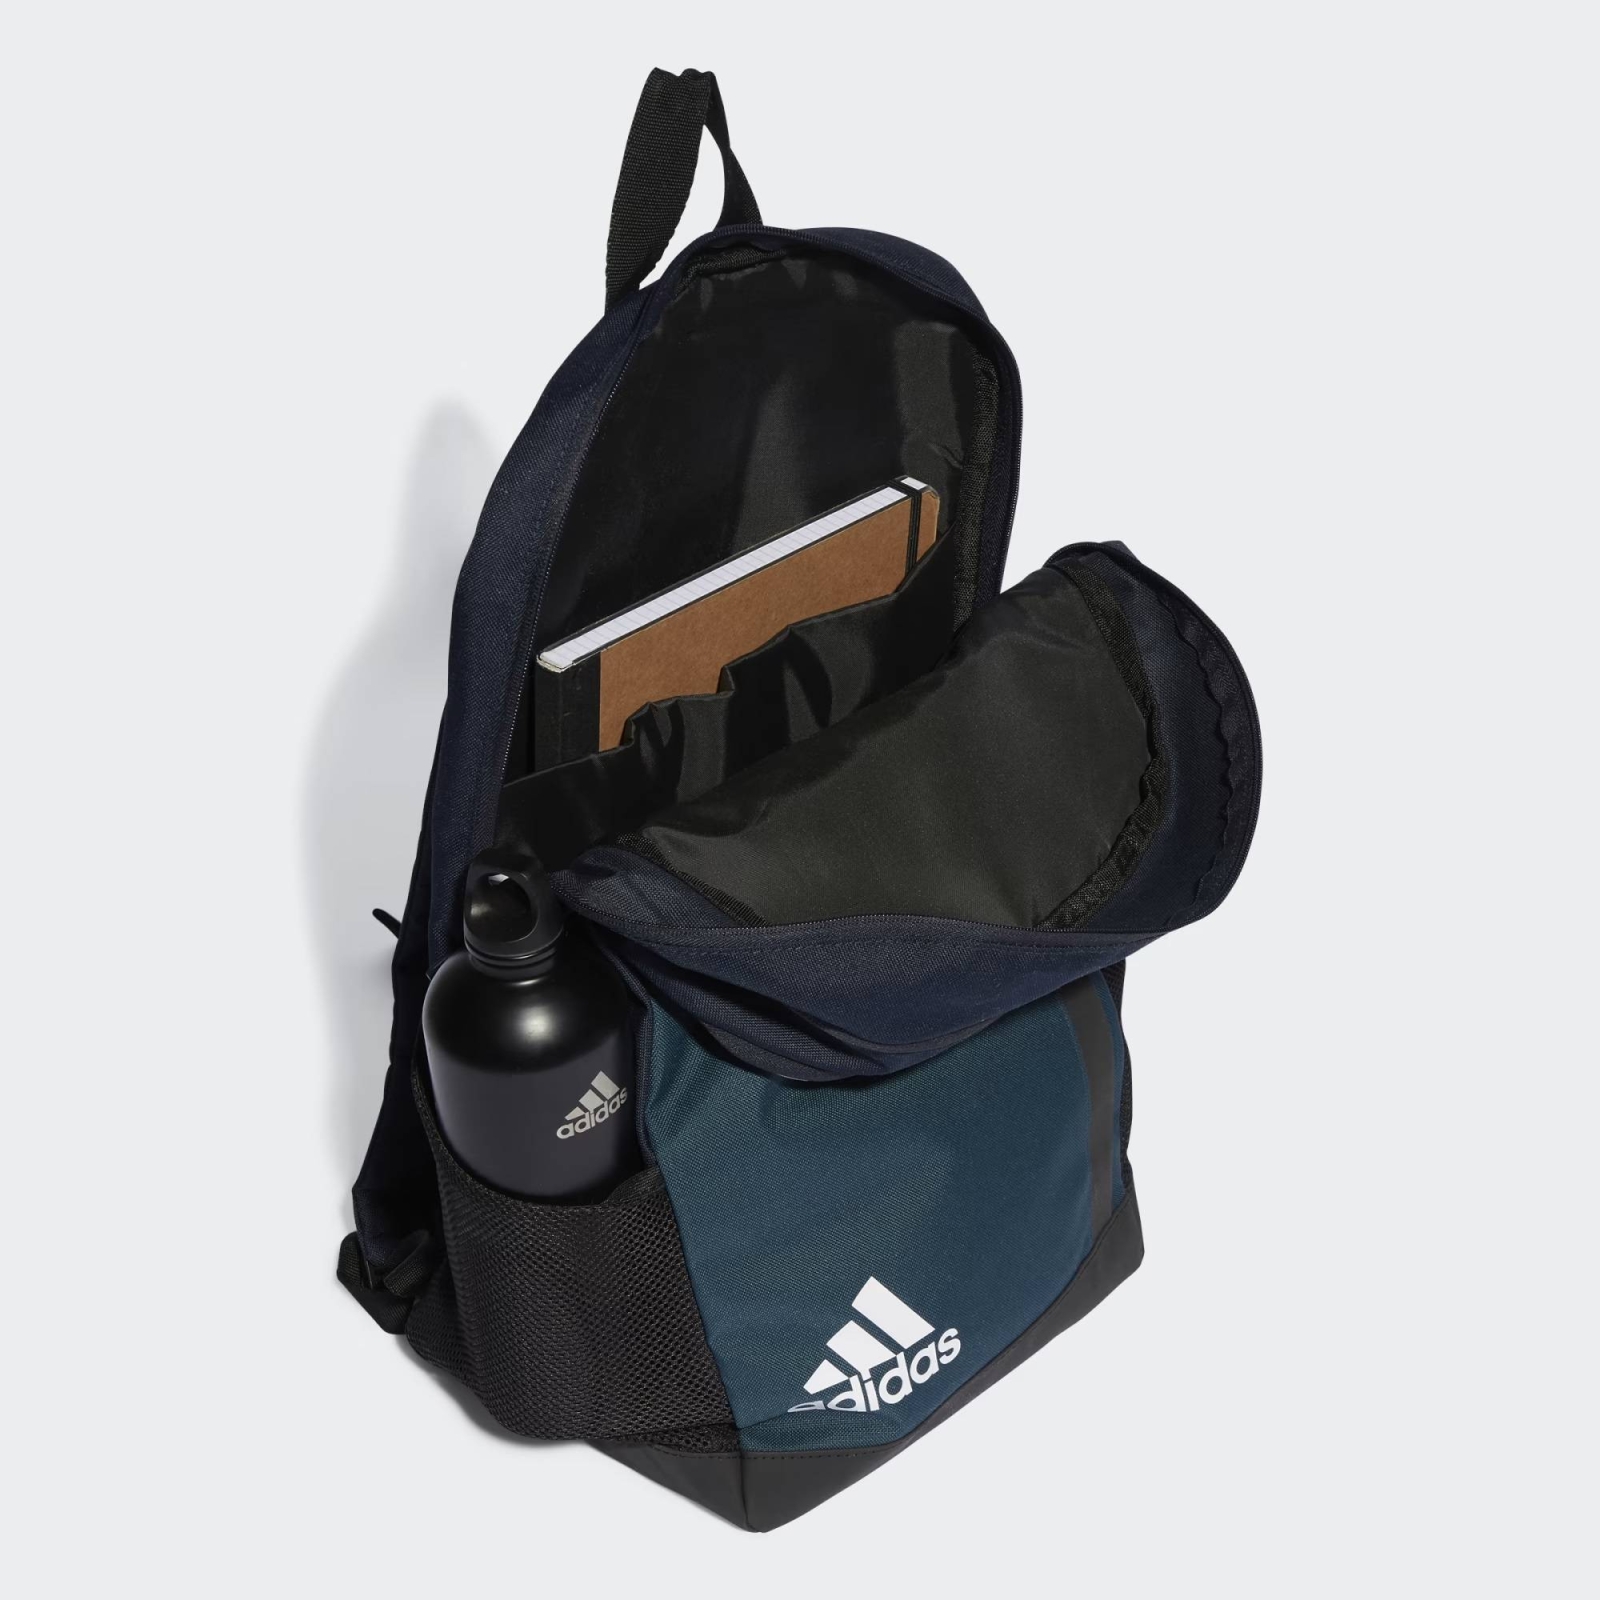 ADIDAS MOTION BOS BACK PACK